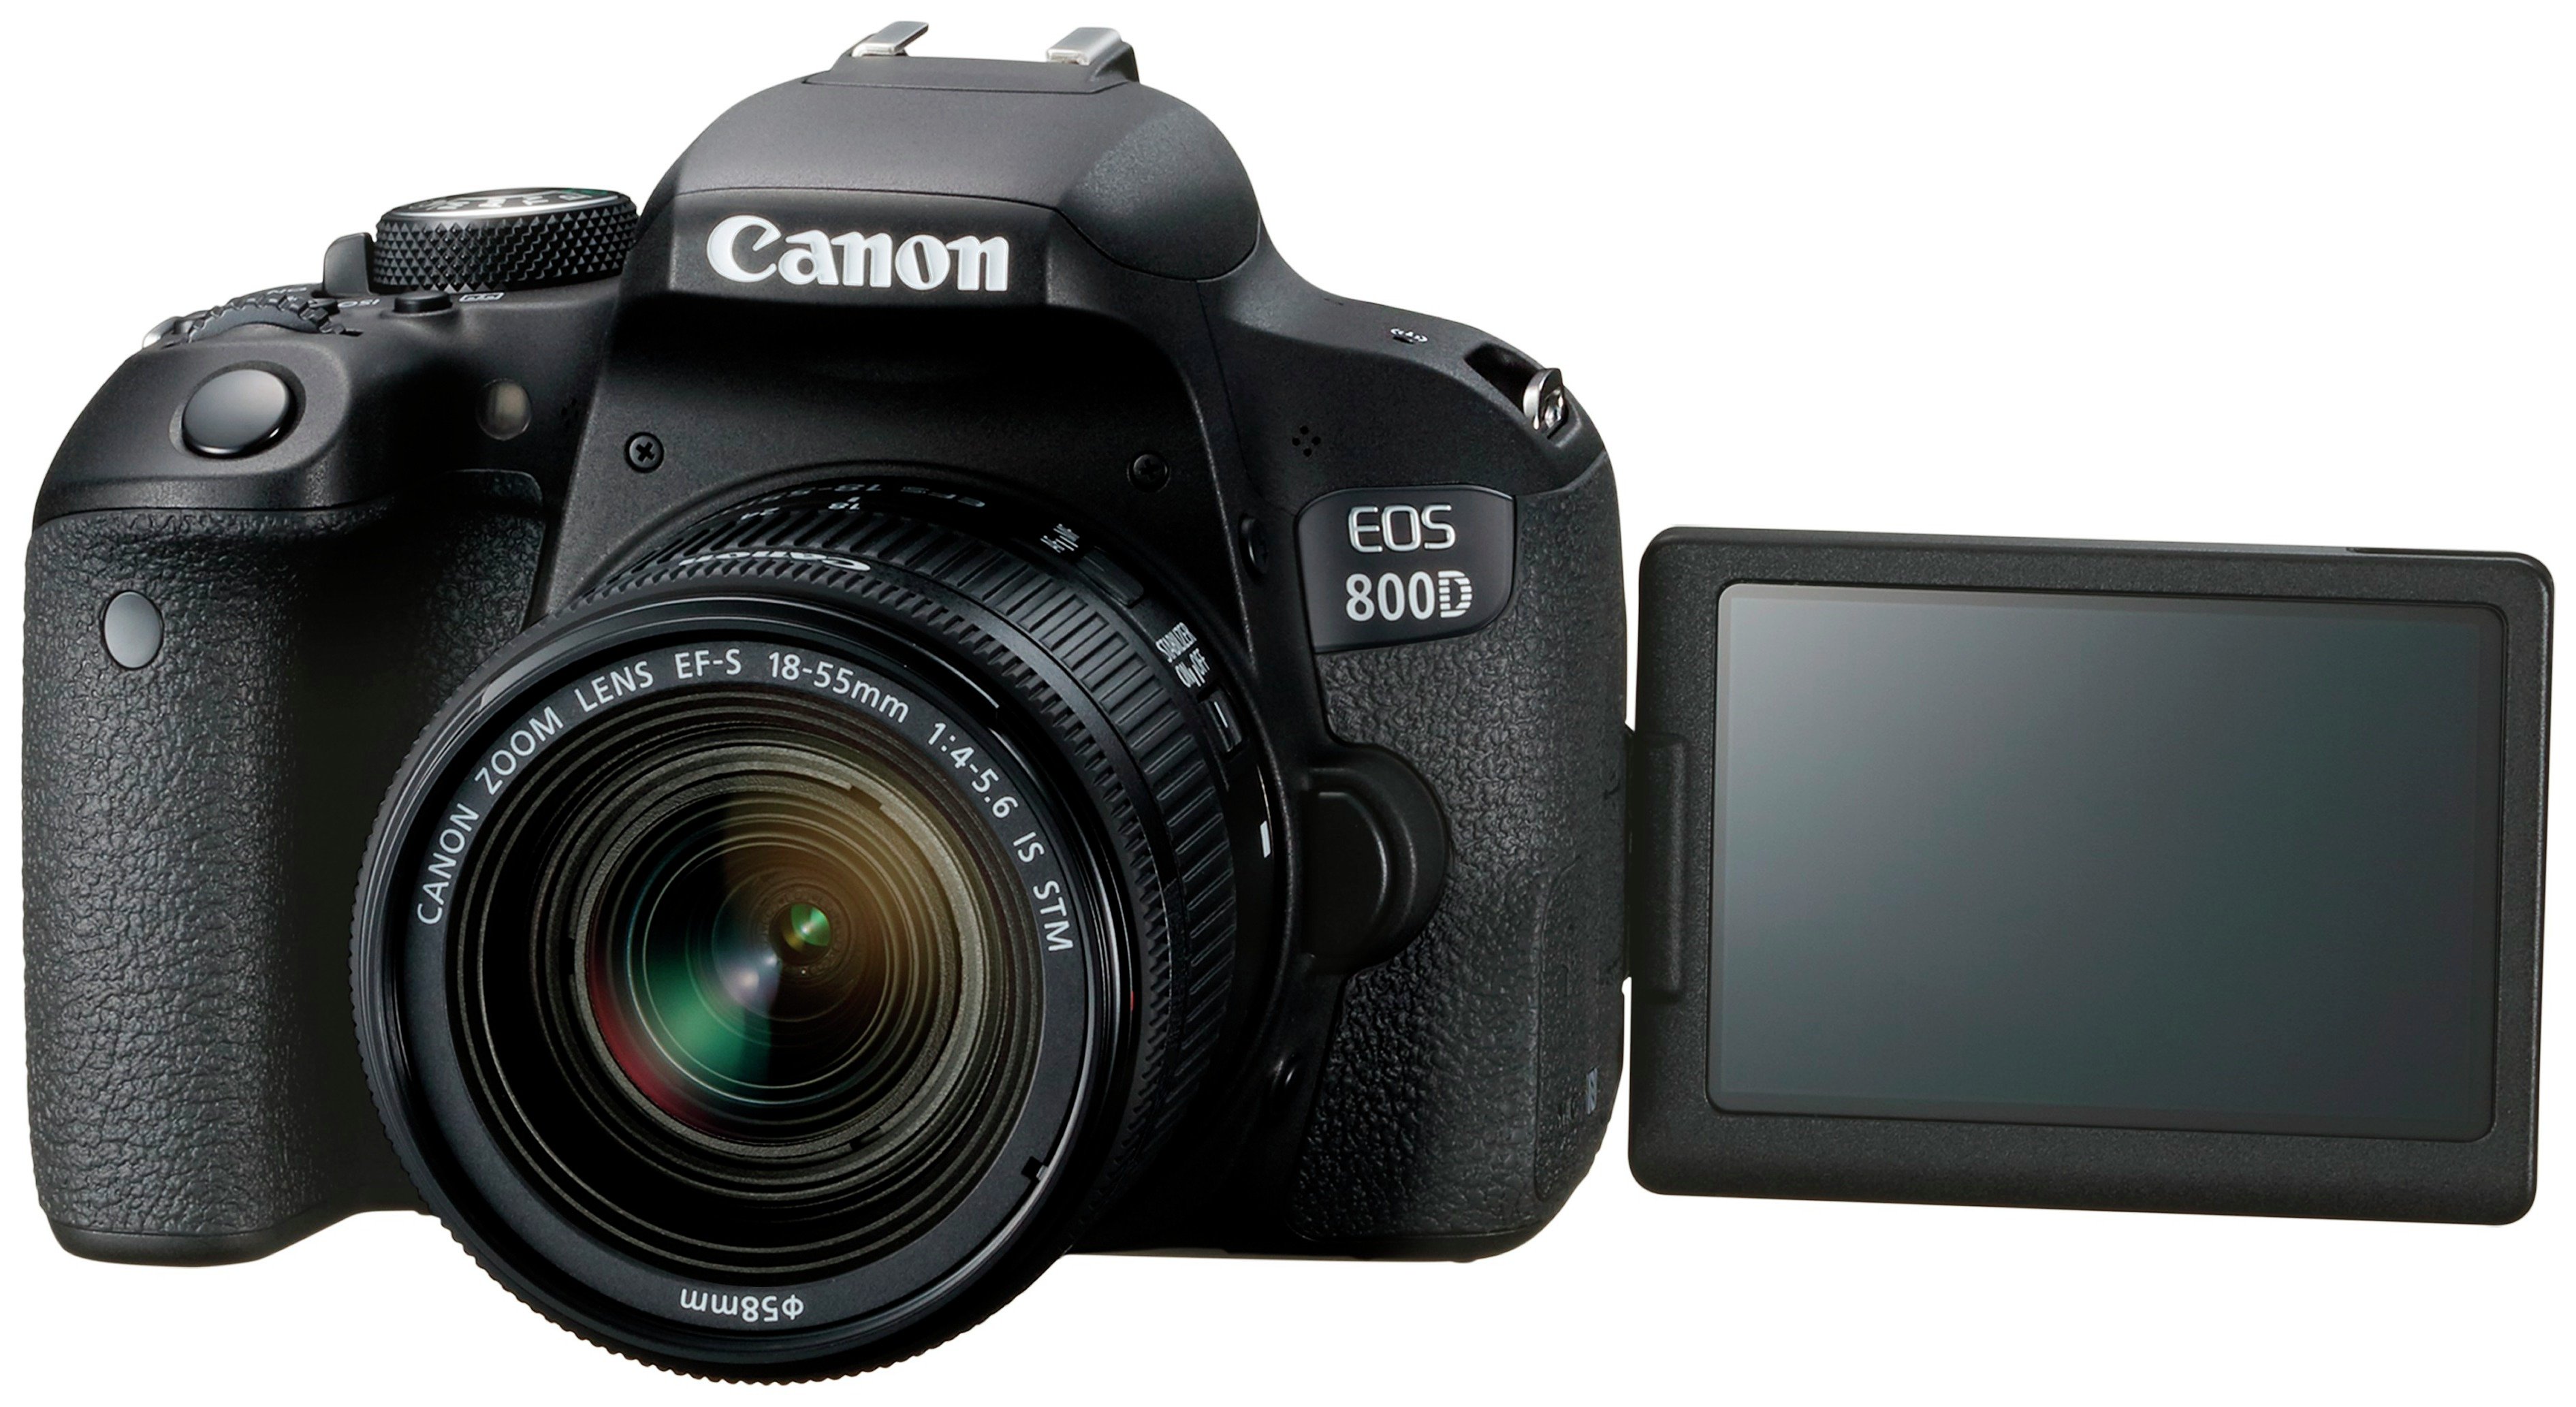 Canon EOS 800D DSLR Camera with 18-55mm IS STM Lens Reviews